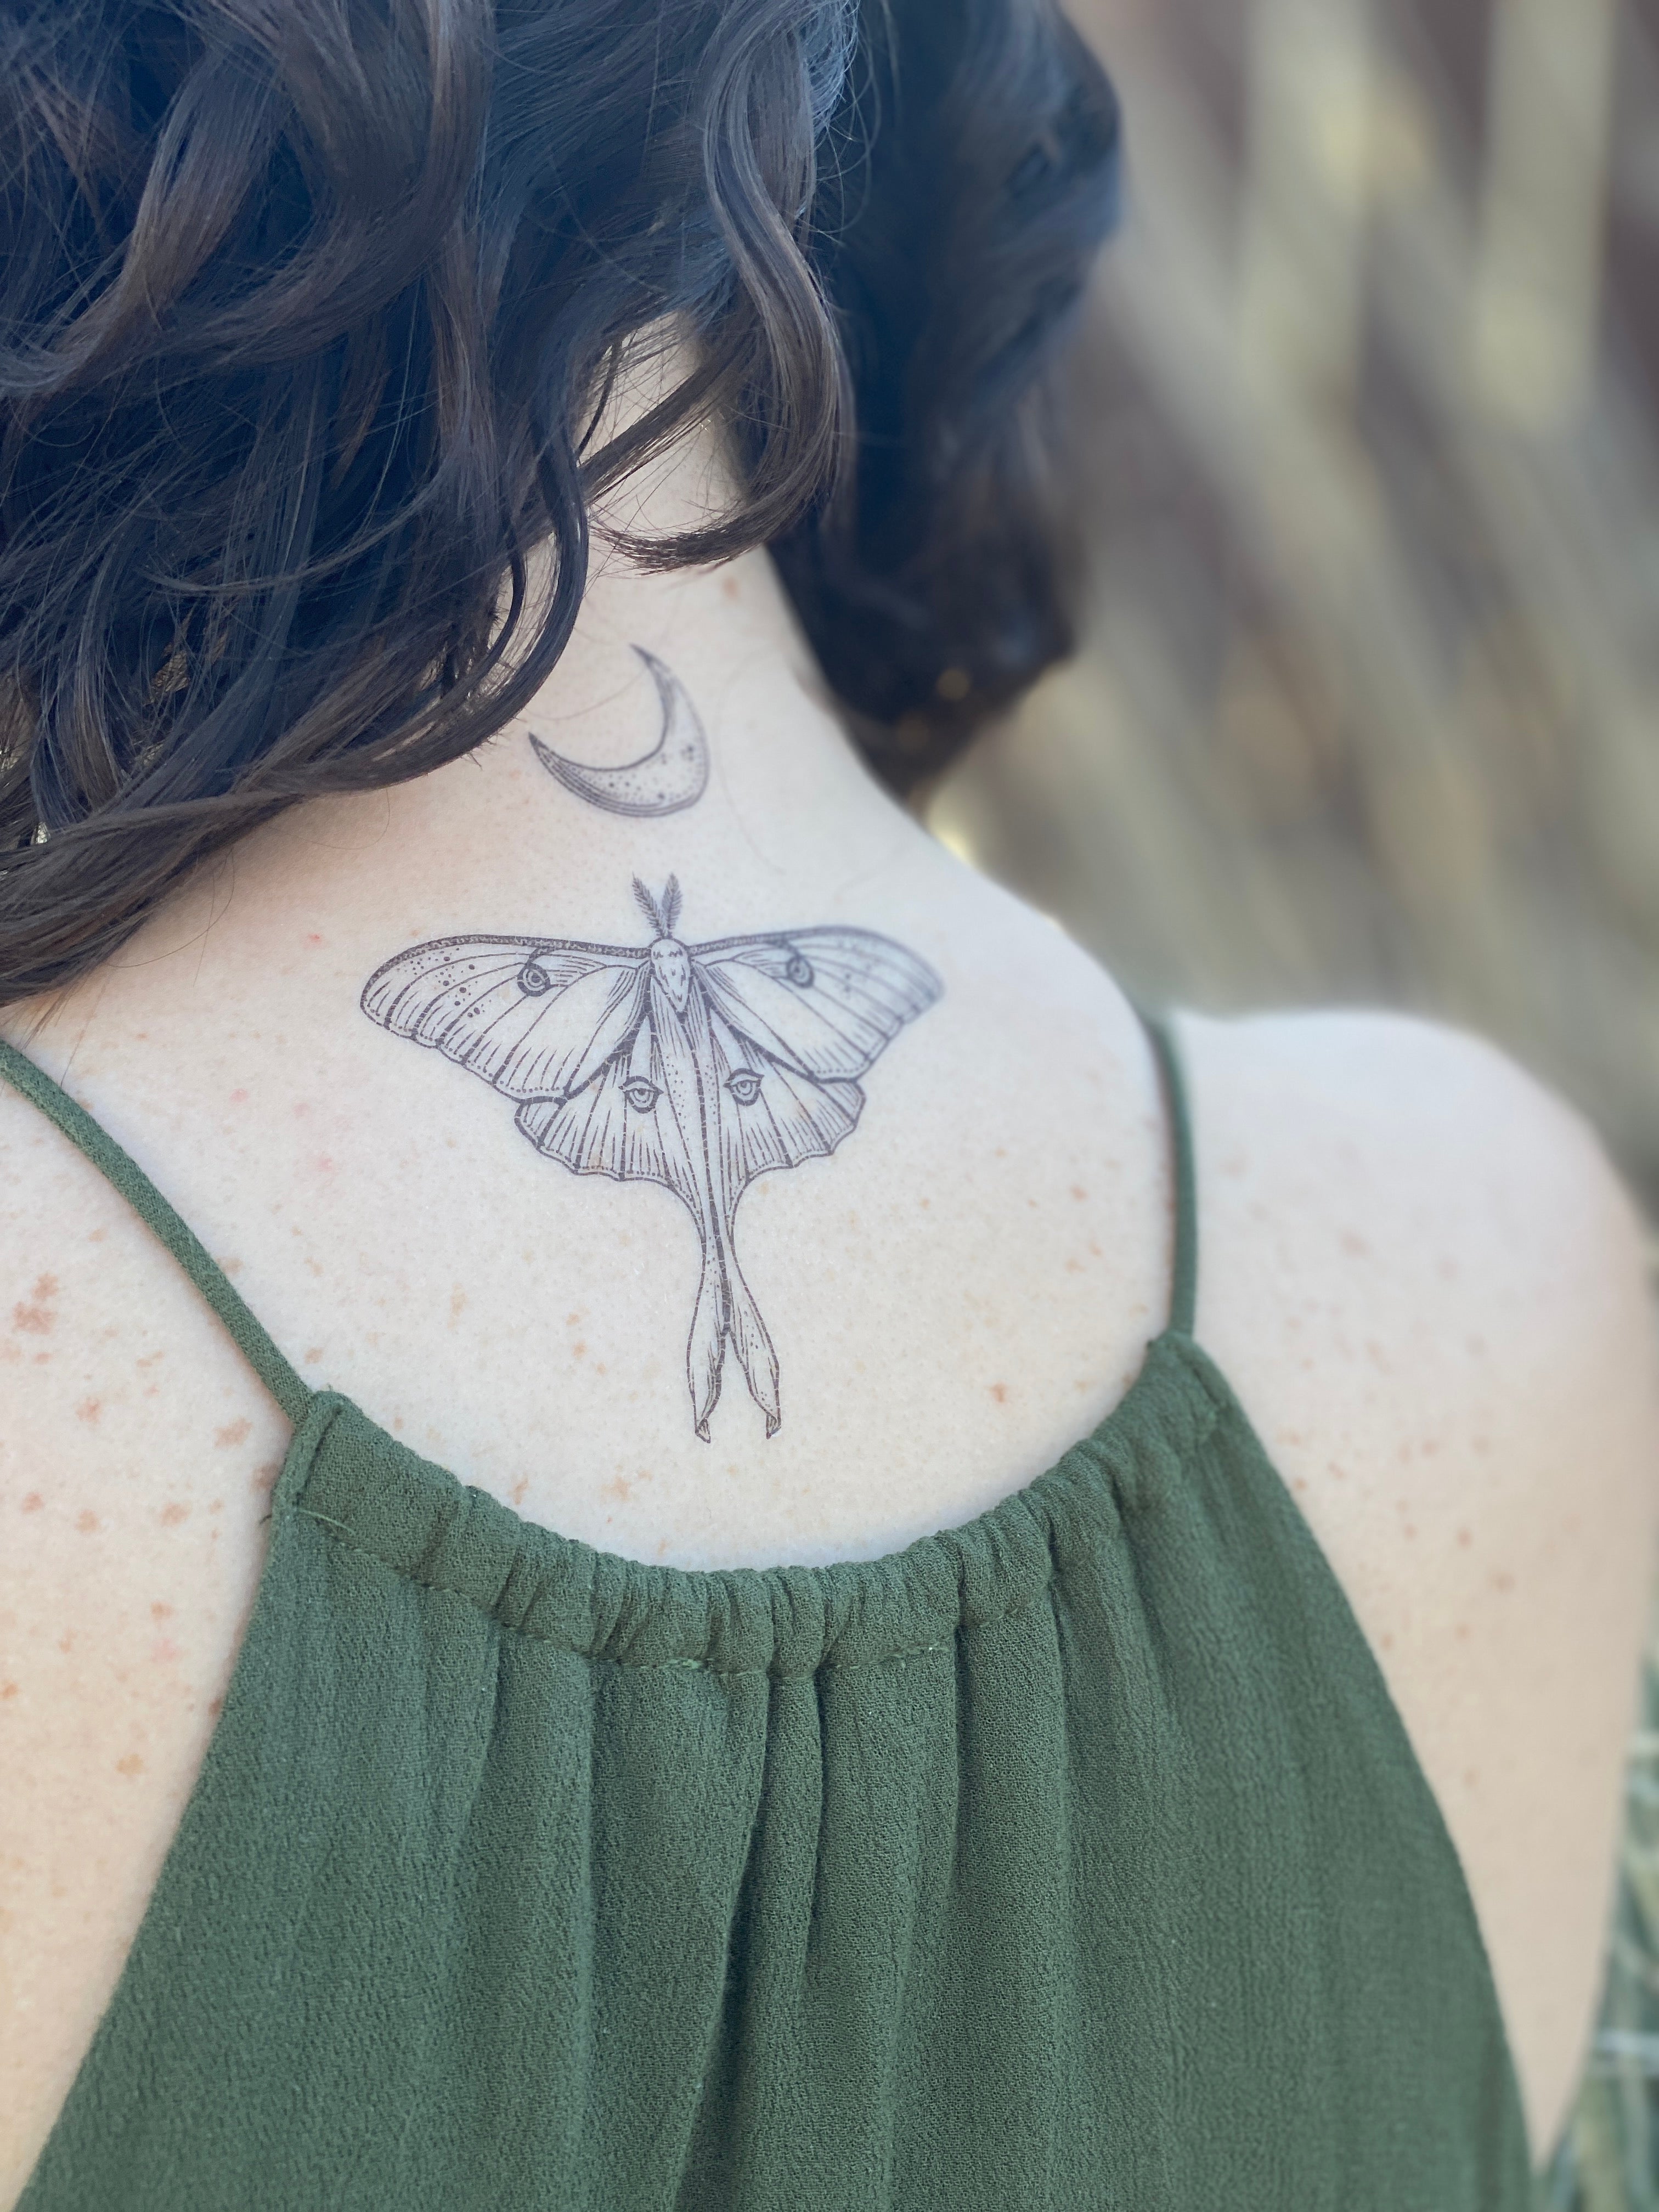 Luna Moth Temporary Tattoo Black Line Tattoo Winged Insect  Etsy